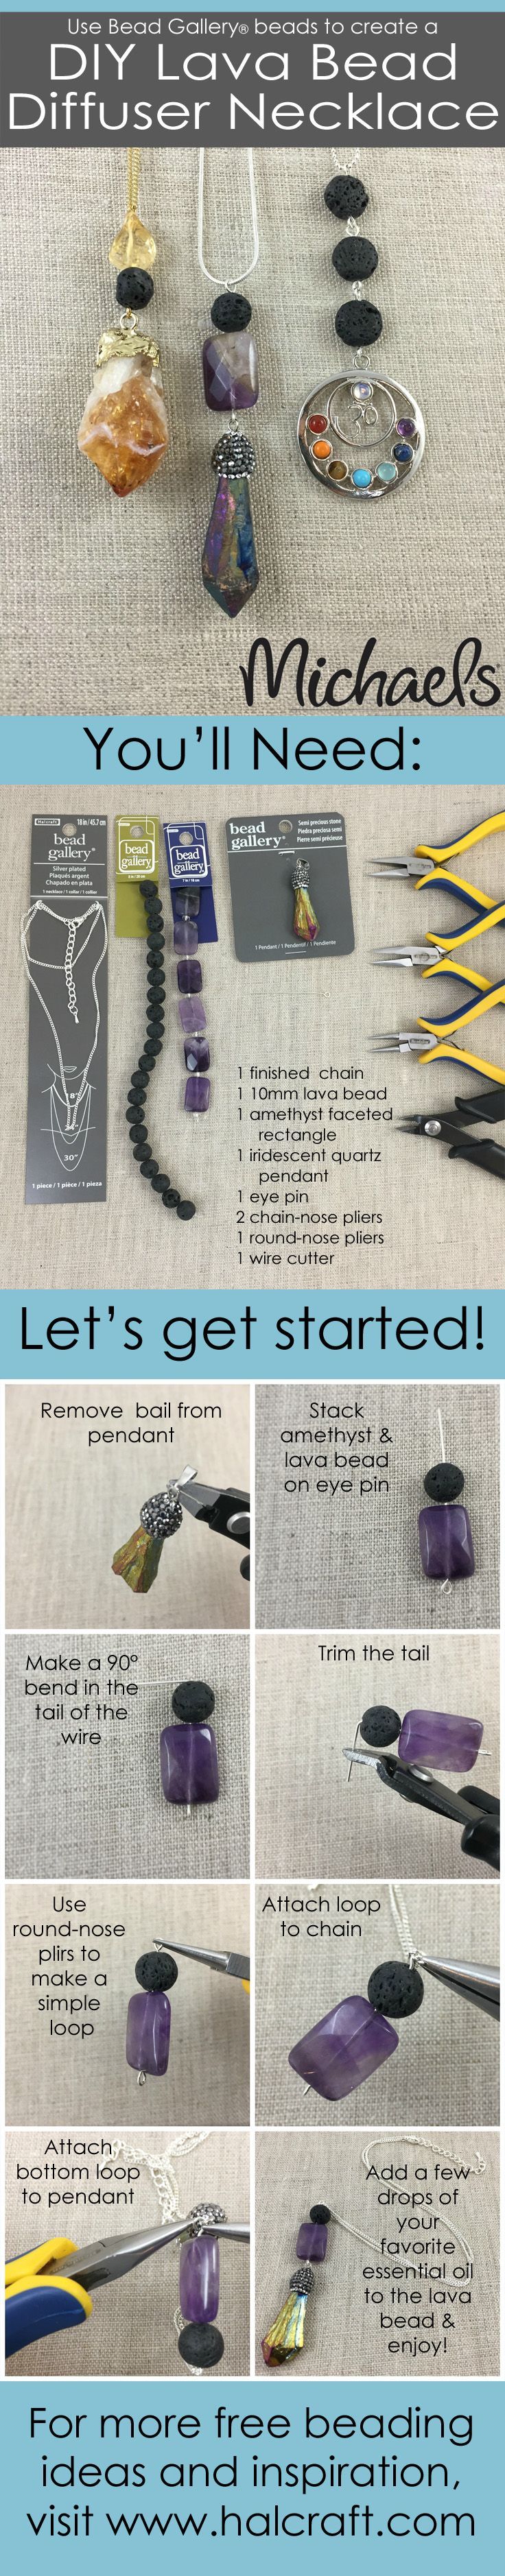 DIY Lava diffuser necklaces using Bead Gallery beads #madewithmichaels